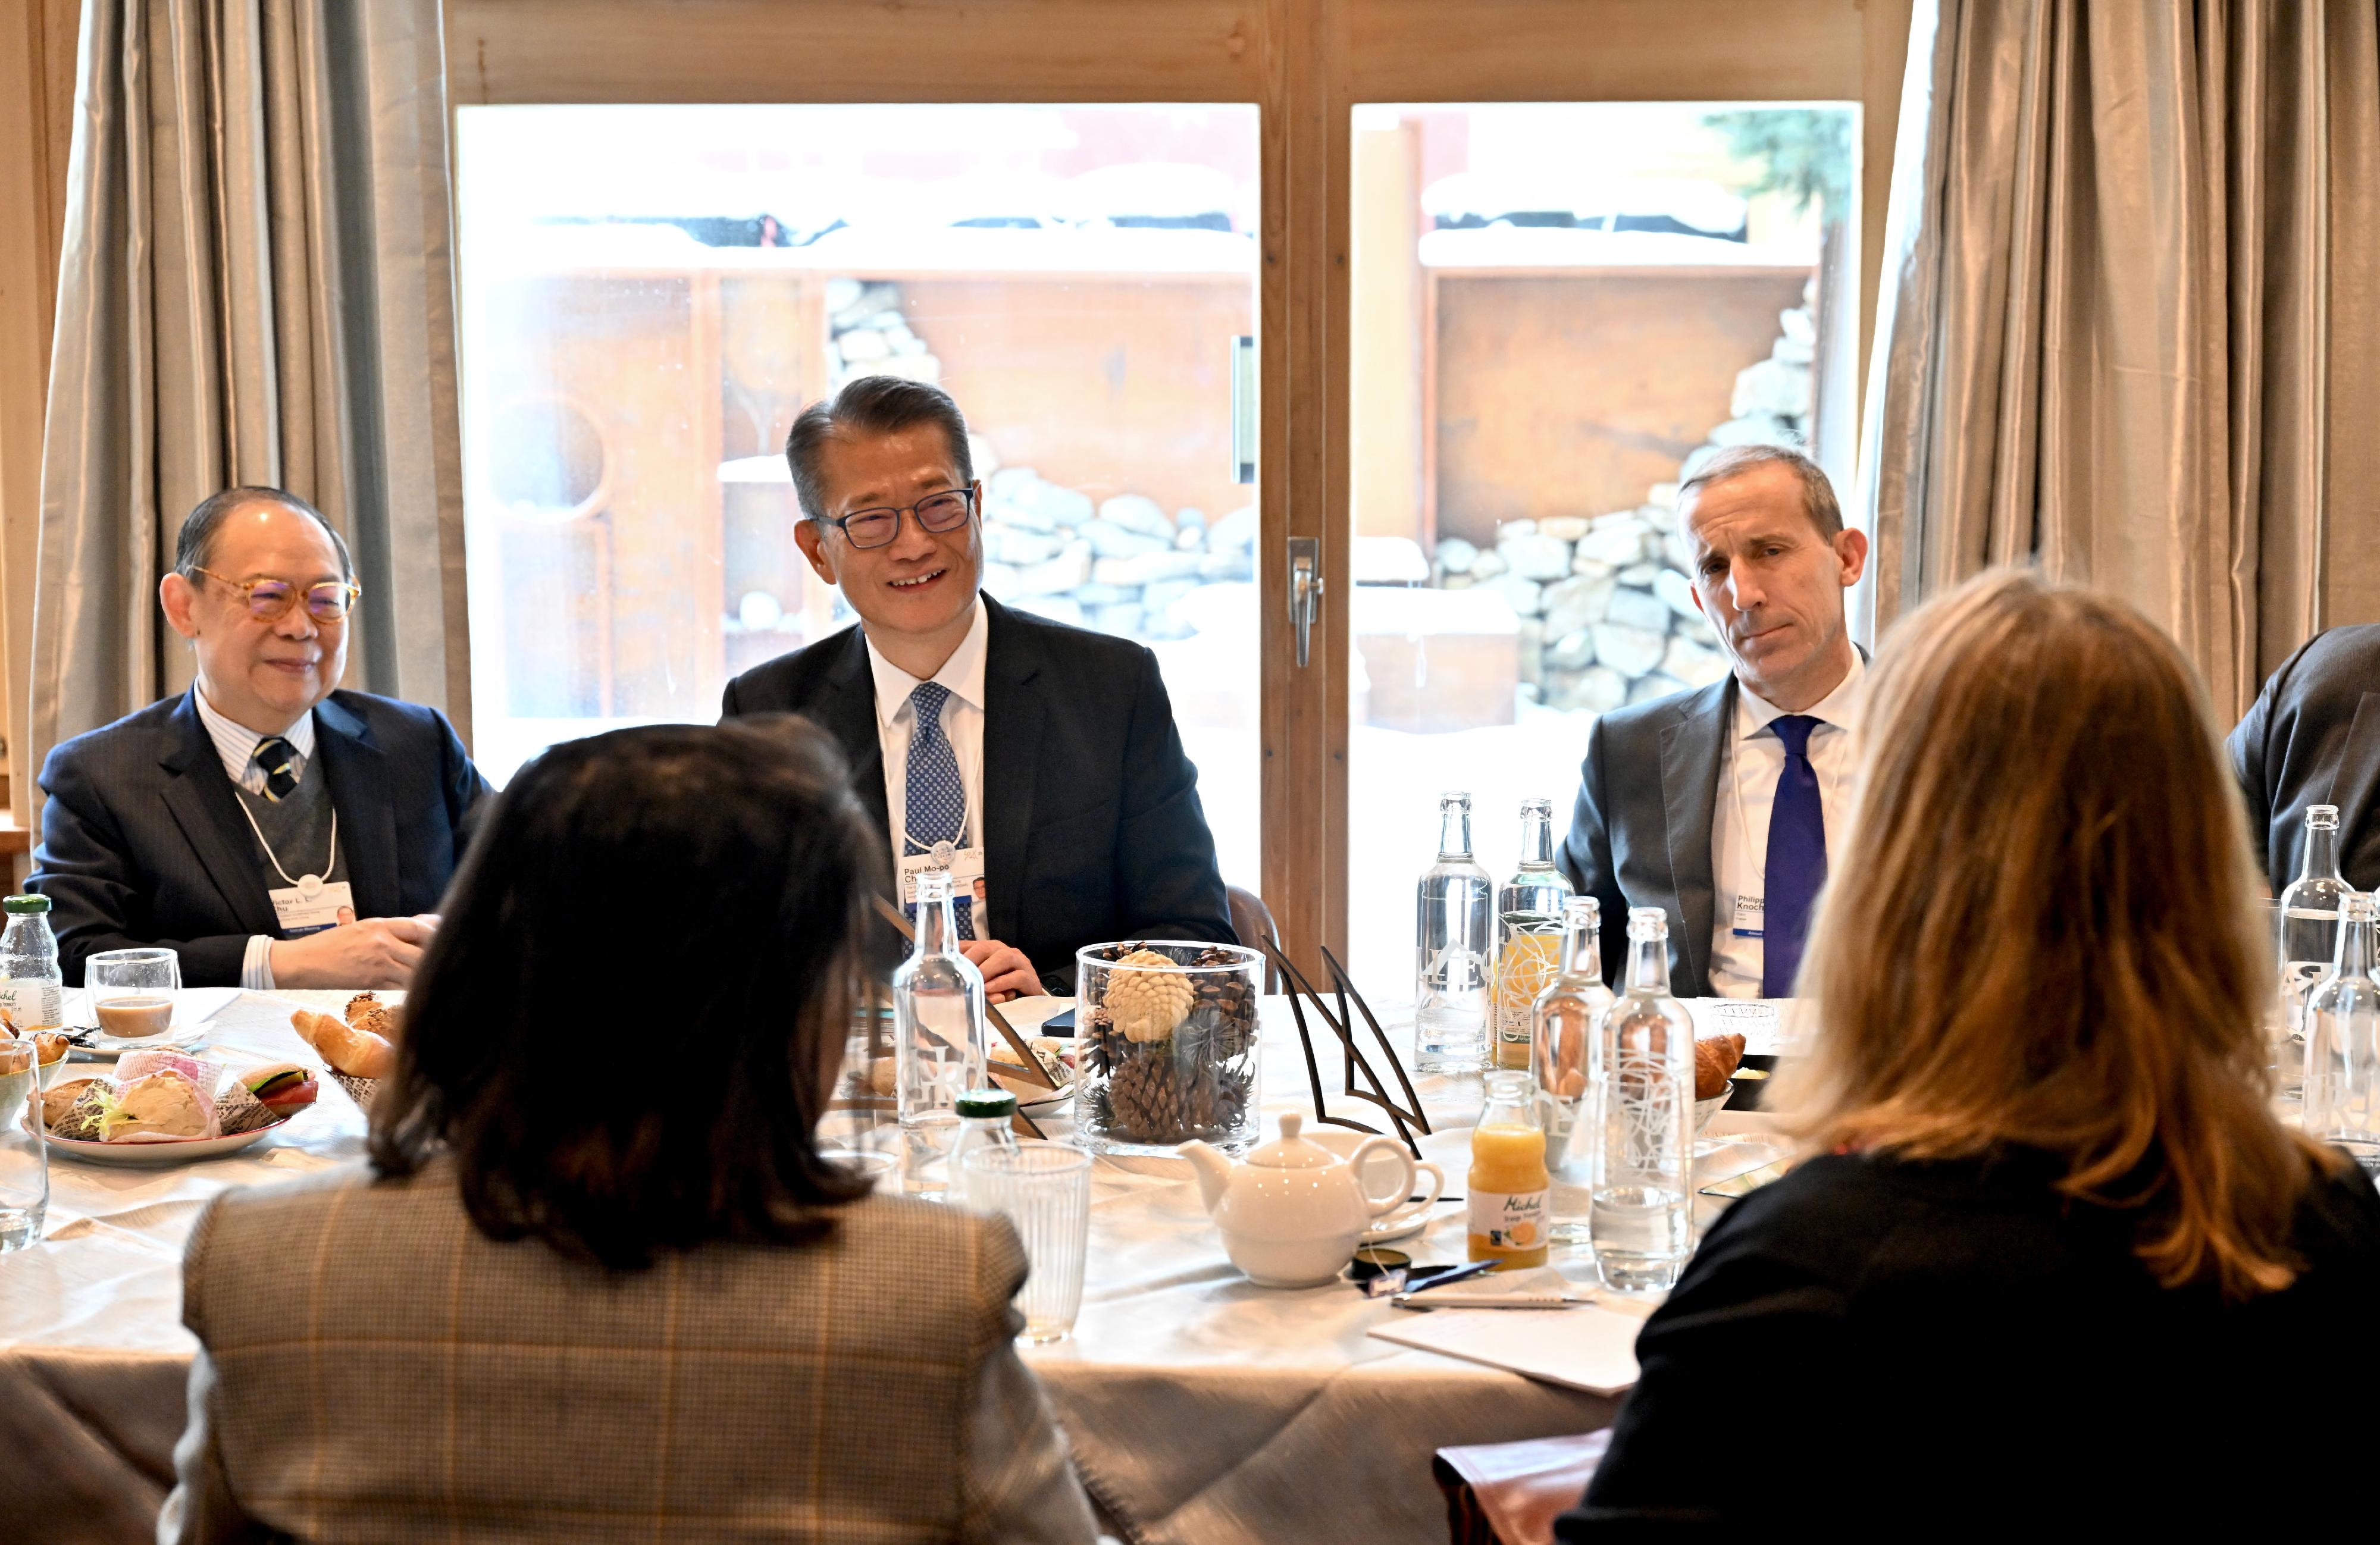 The Financial Secretay, Mr Paul Chan (second left) spoke at the gathering meeting co-hosted by the Co-chair of the Hong Kong-Europe Business Council, Mr Victor Chu, and the Chairman of Credit Suisse, Mr Axel Lehmann.